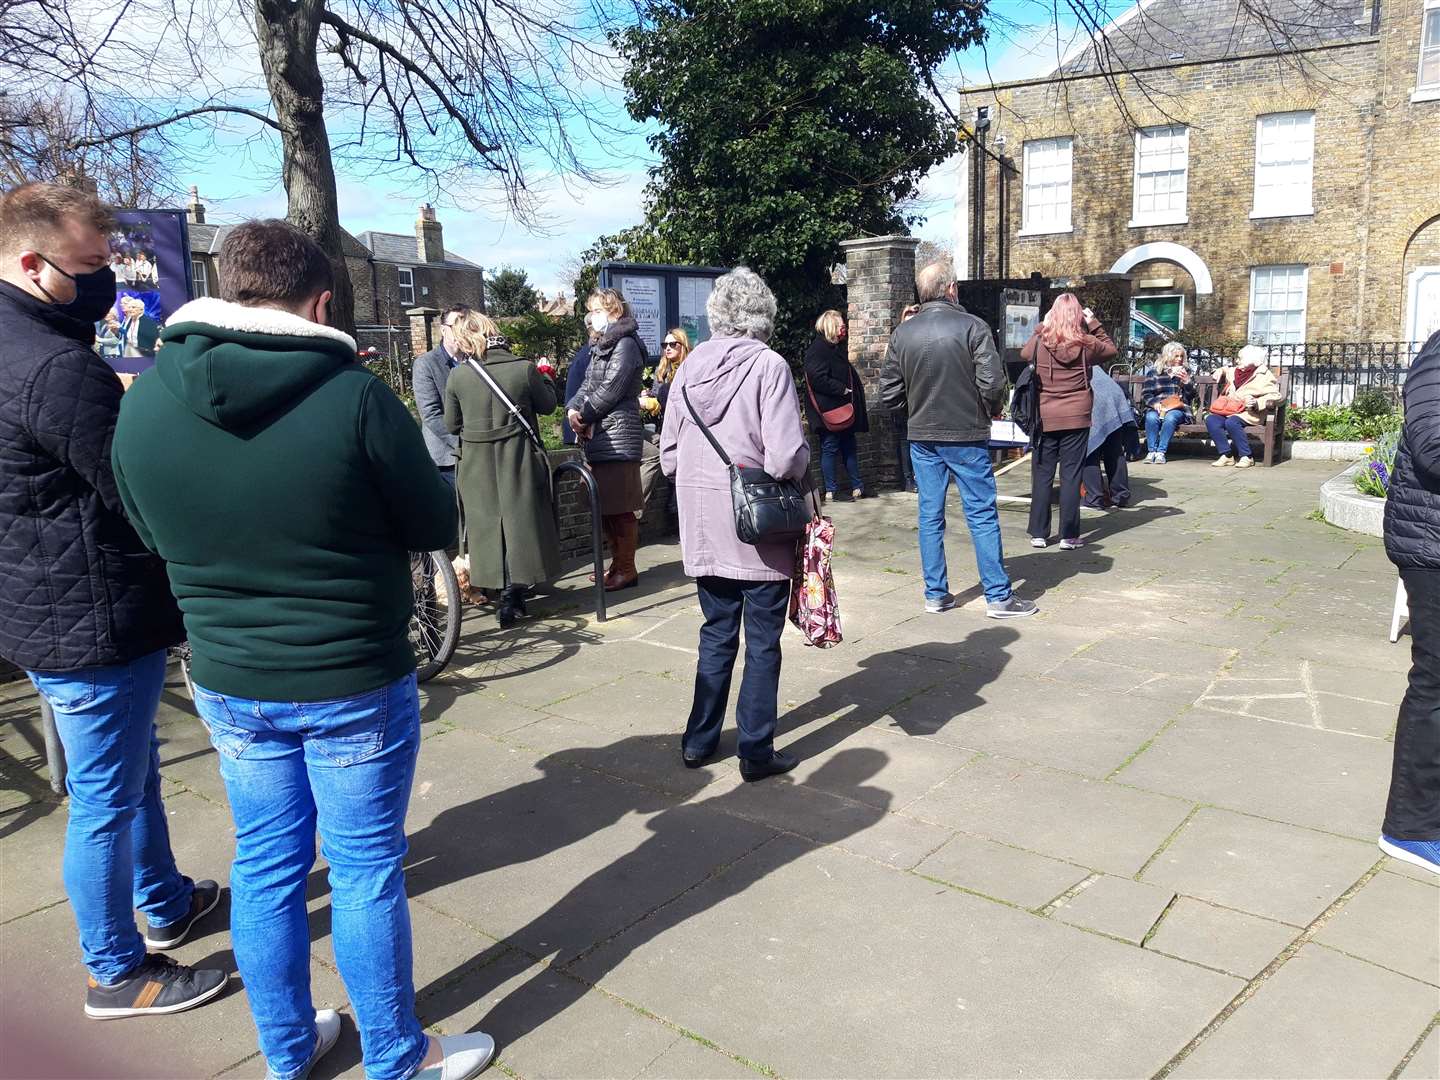 The socially distanced queue to sign the book for Sarah Everard. Picture: Susan Carlyle